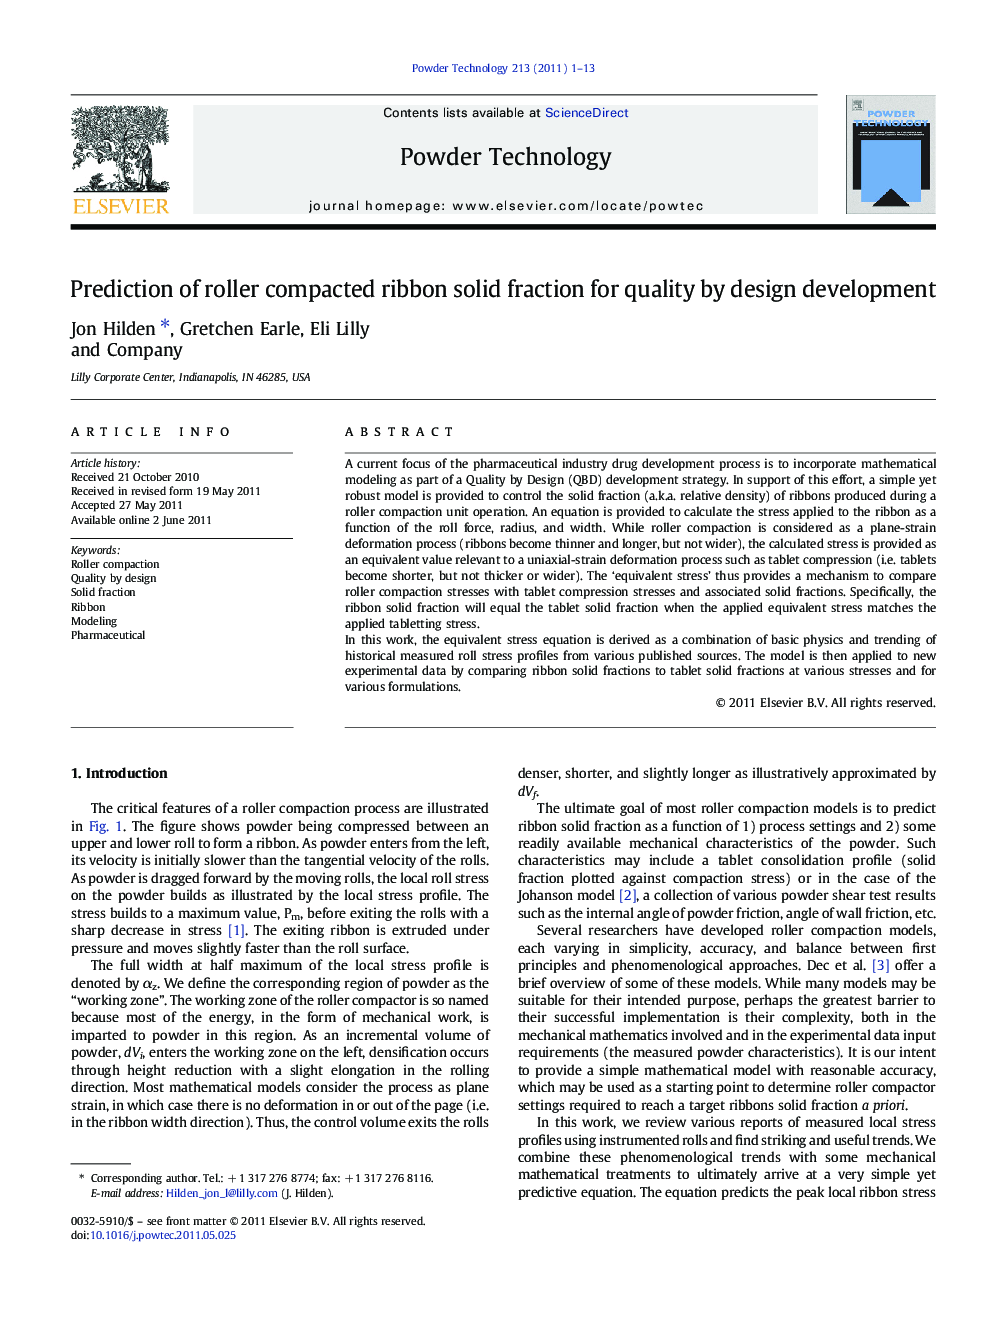 Prediction of roller compacted ribbon solid fraction for quality by design development